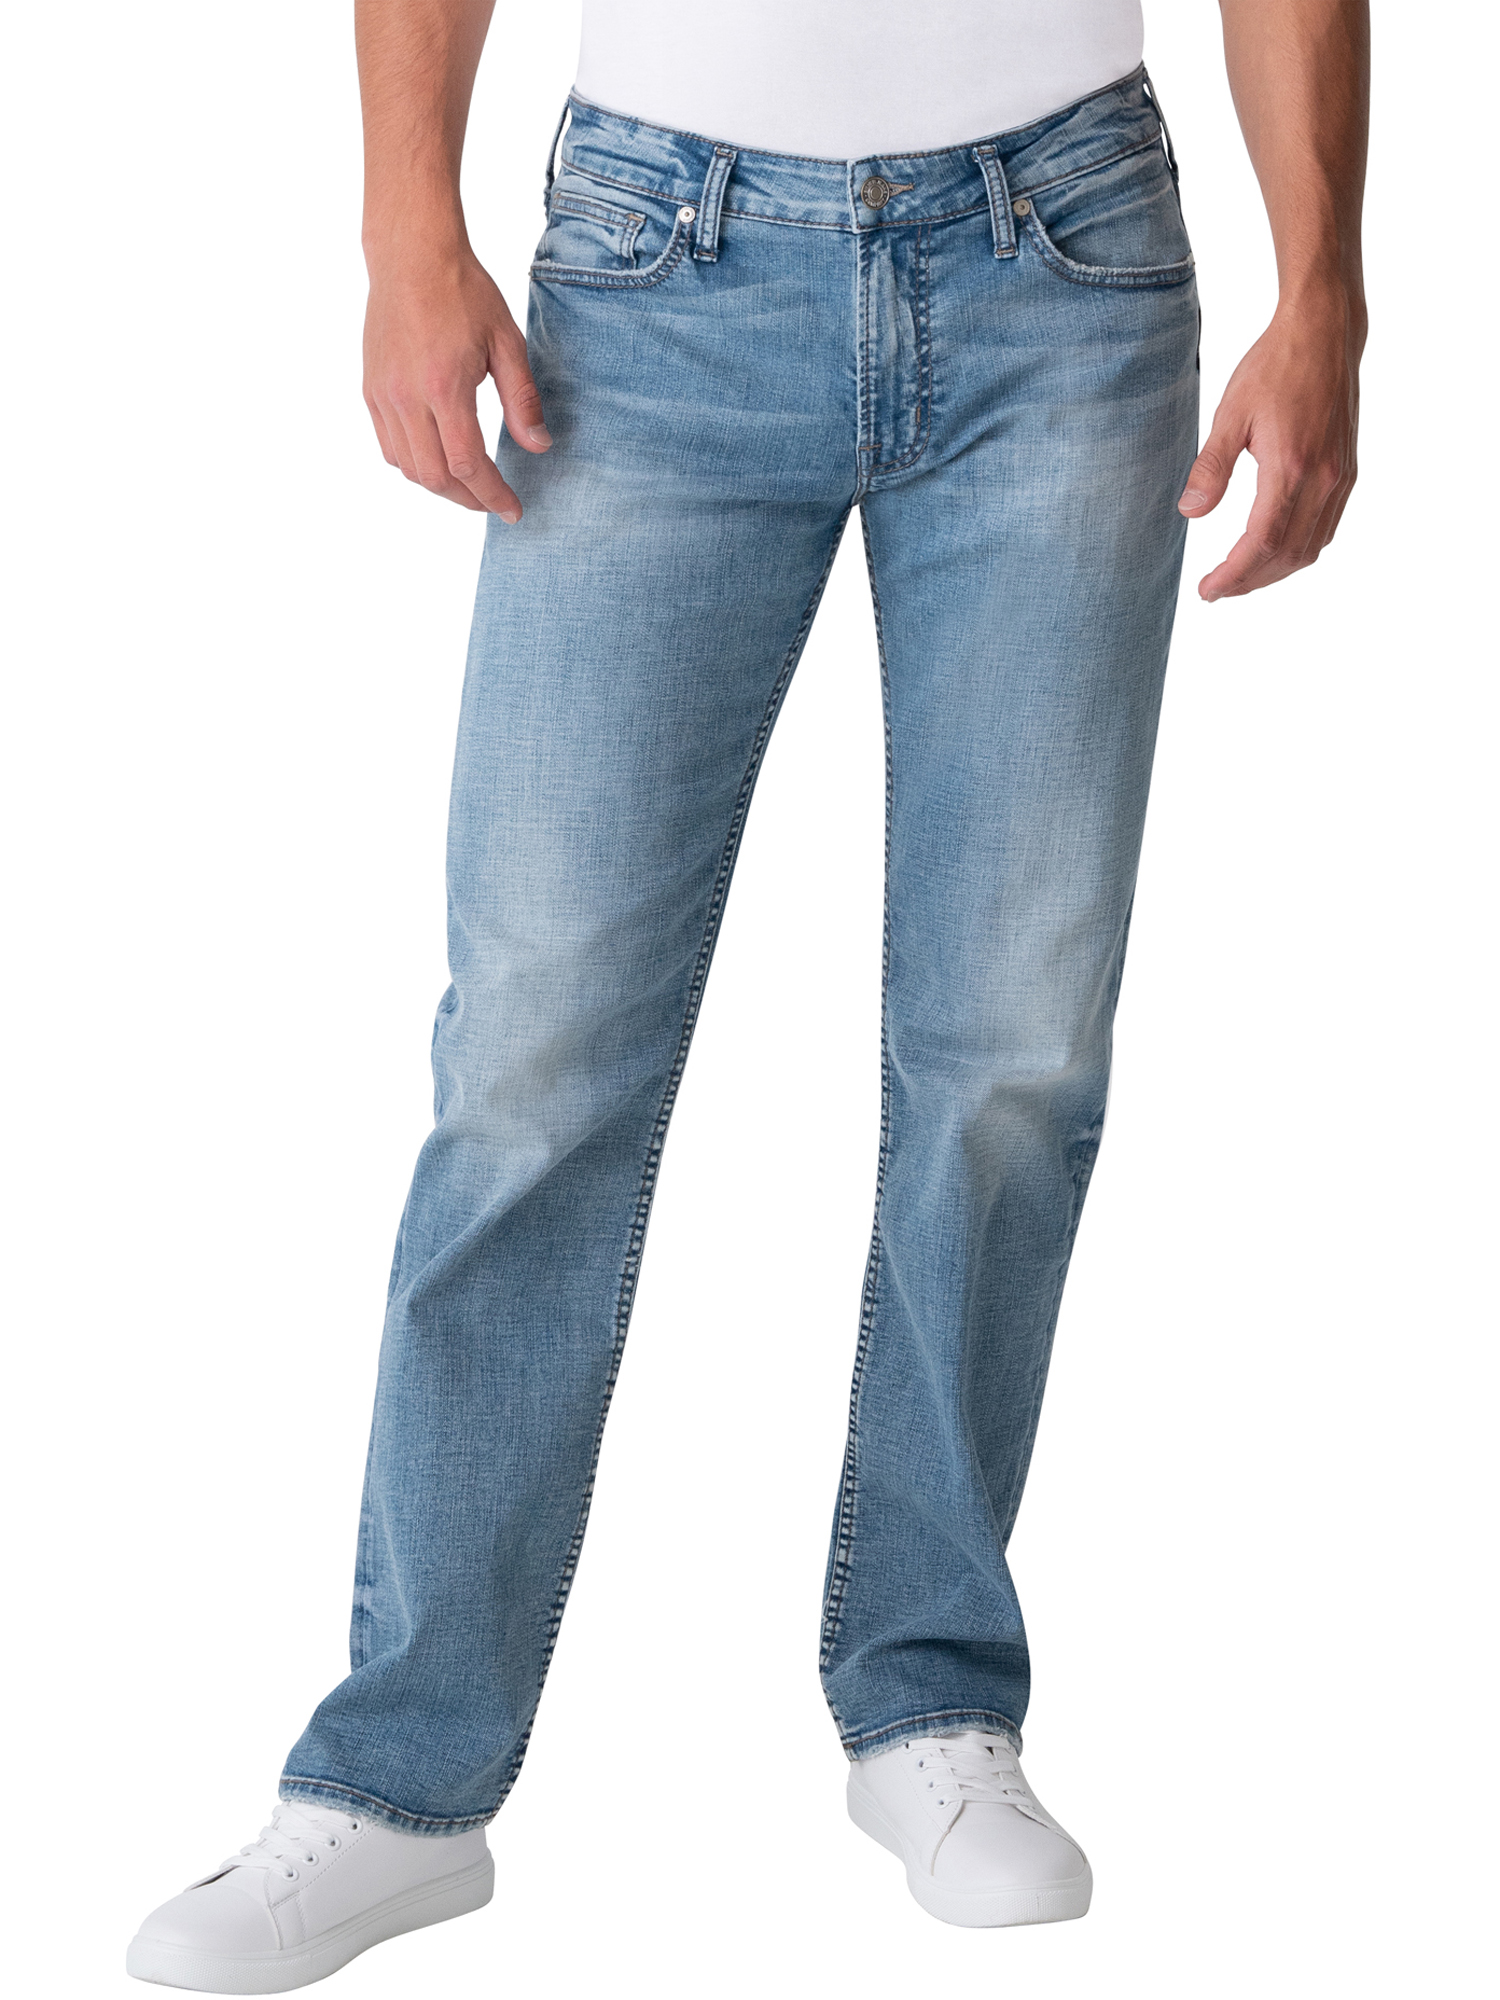 Silver Jeans Co. Men's Allan Classic Fit Straight Leg Jeans, Waist Sizes 28-44 - image 1 of 3